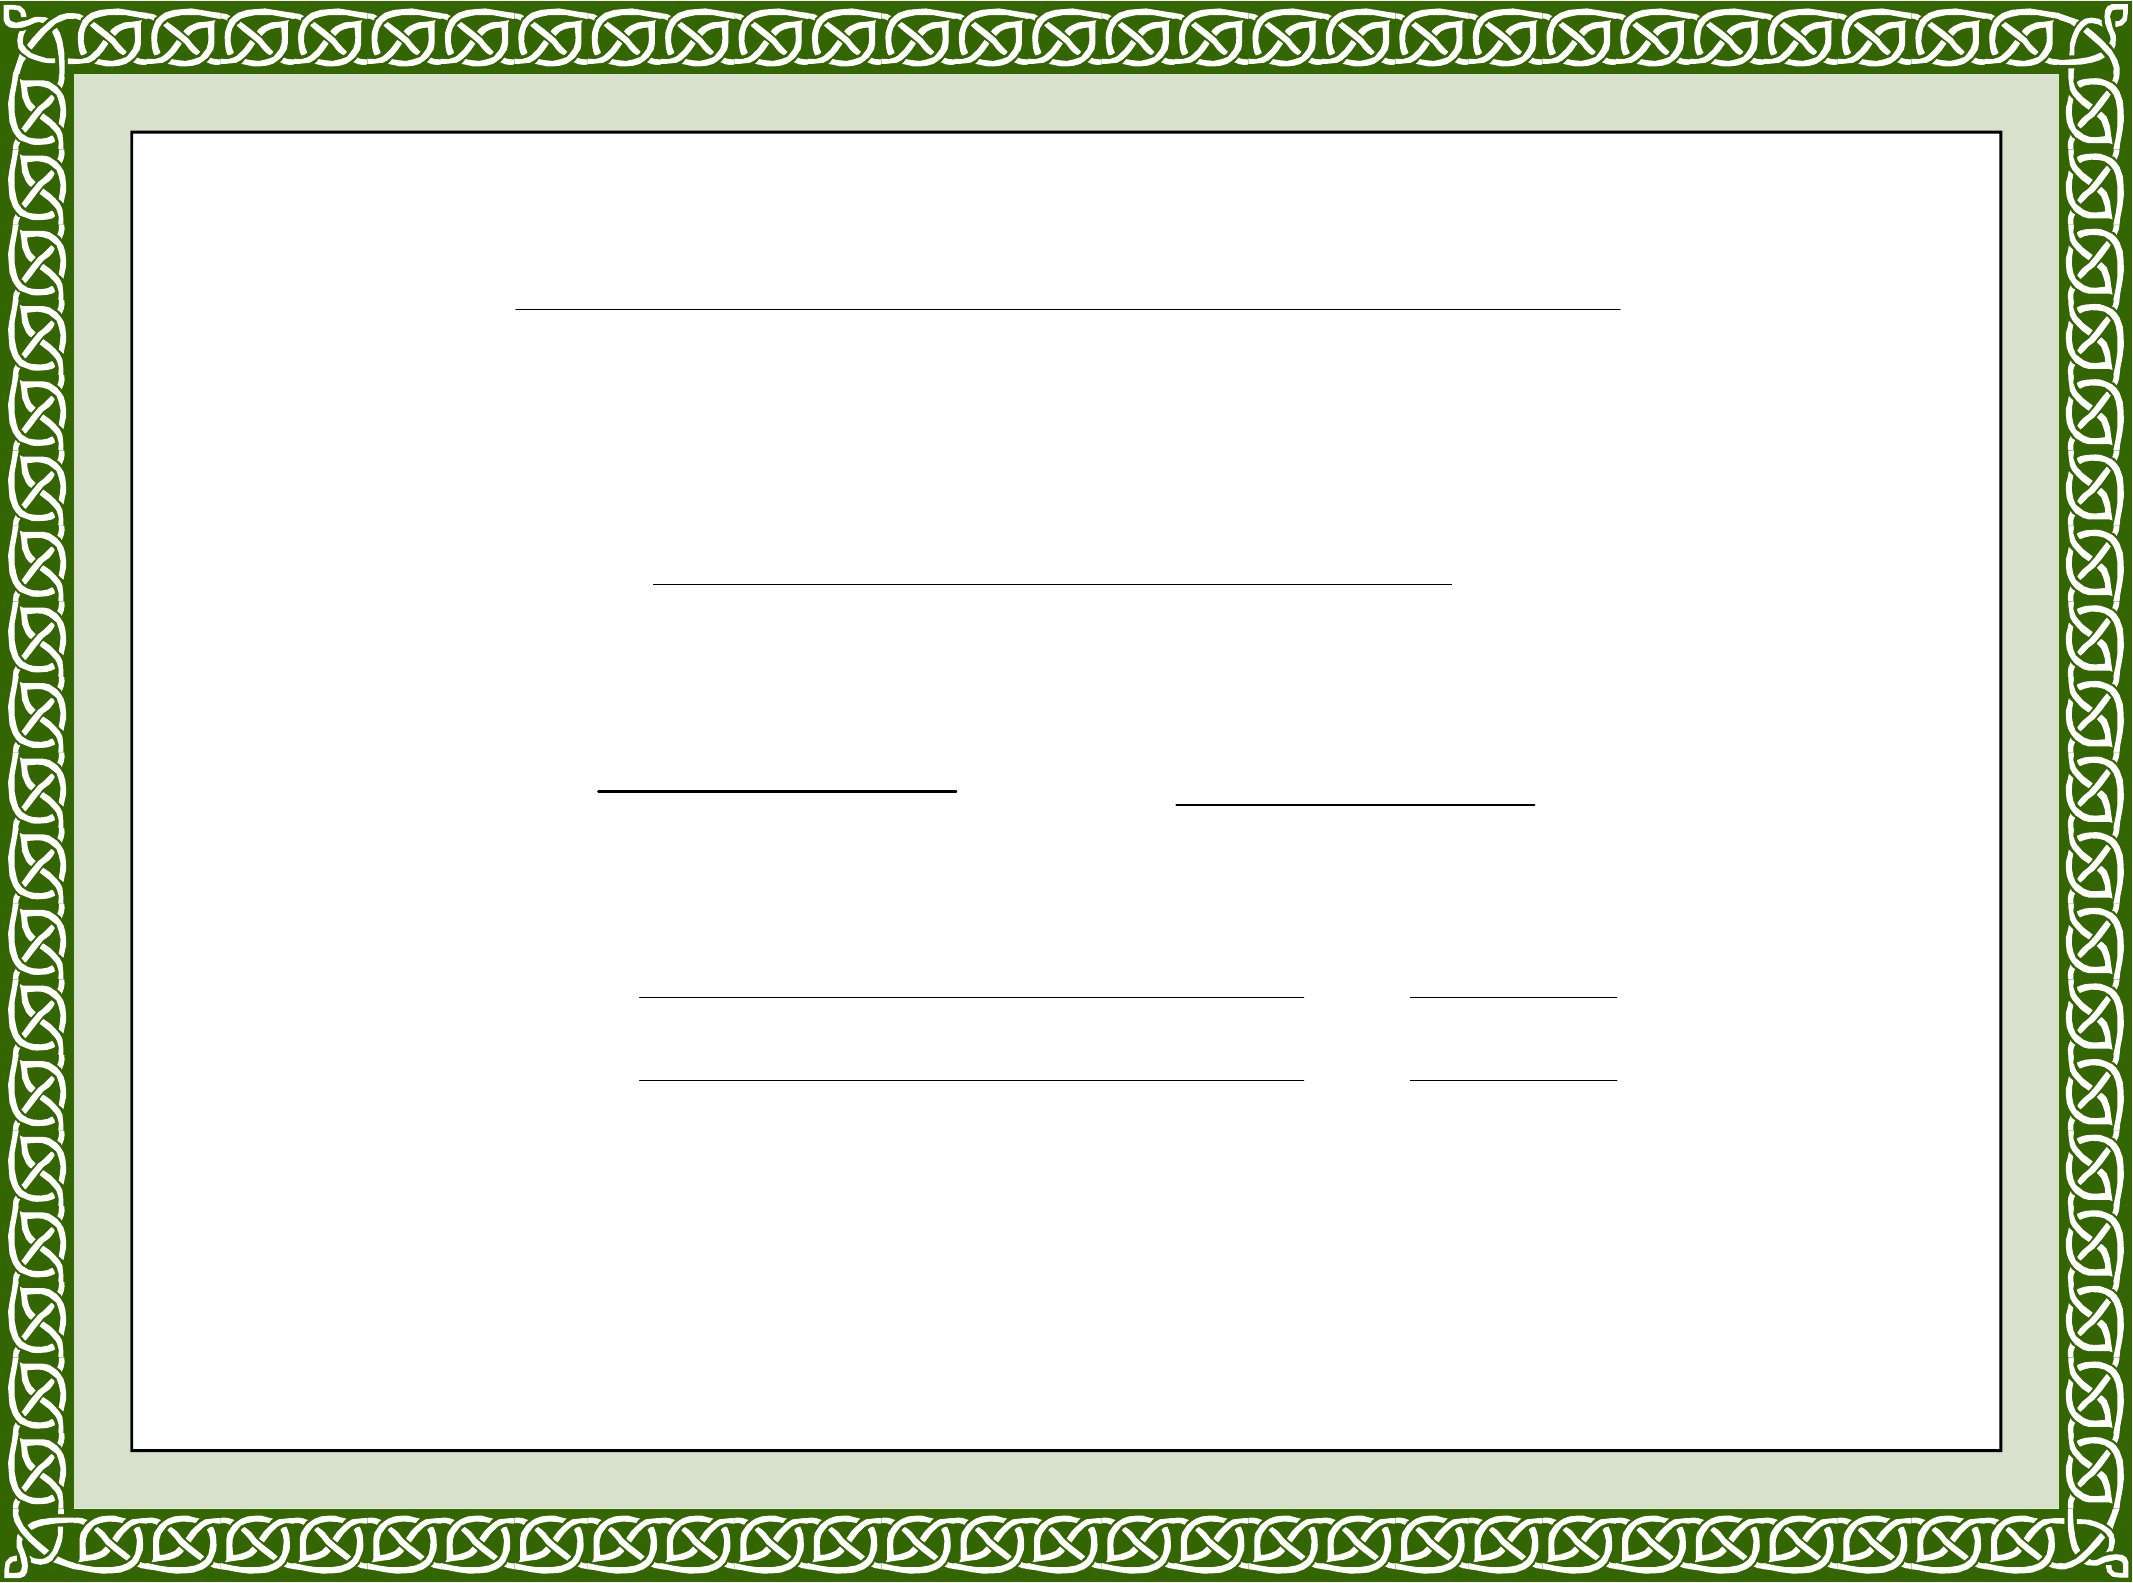 Sample Training Completion Certificate Template Free Download With Regard To Free Training Completion Certificate Templates